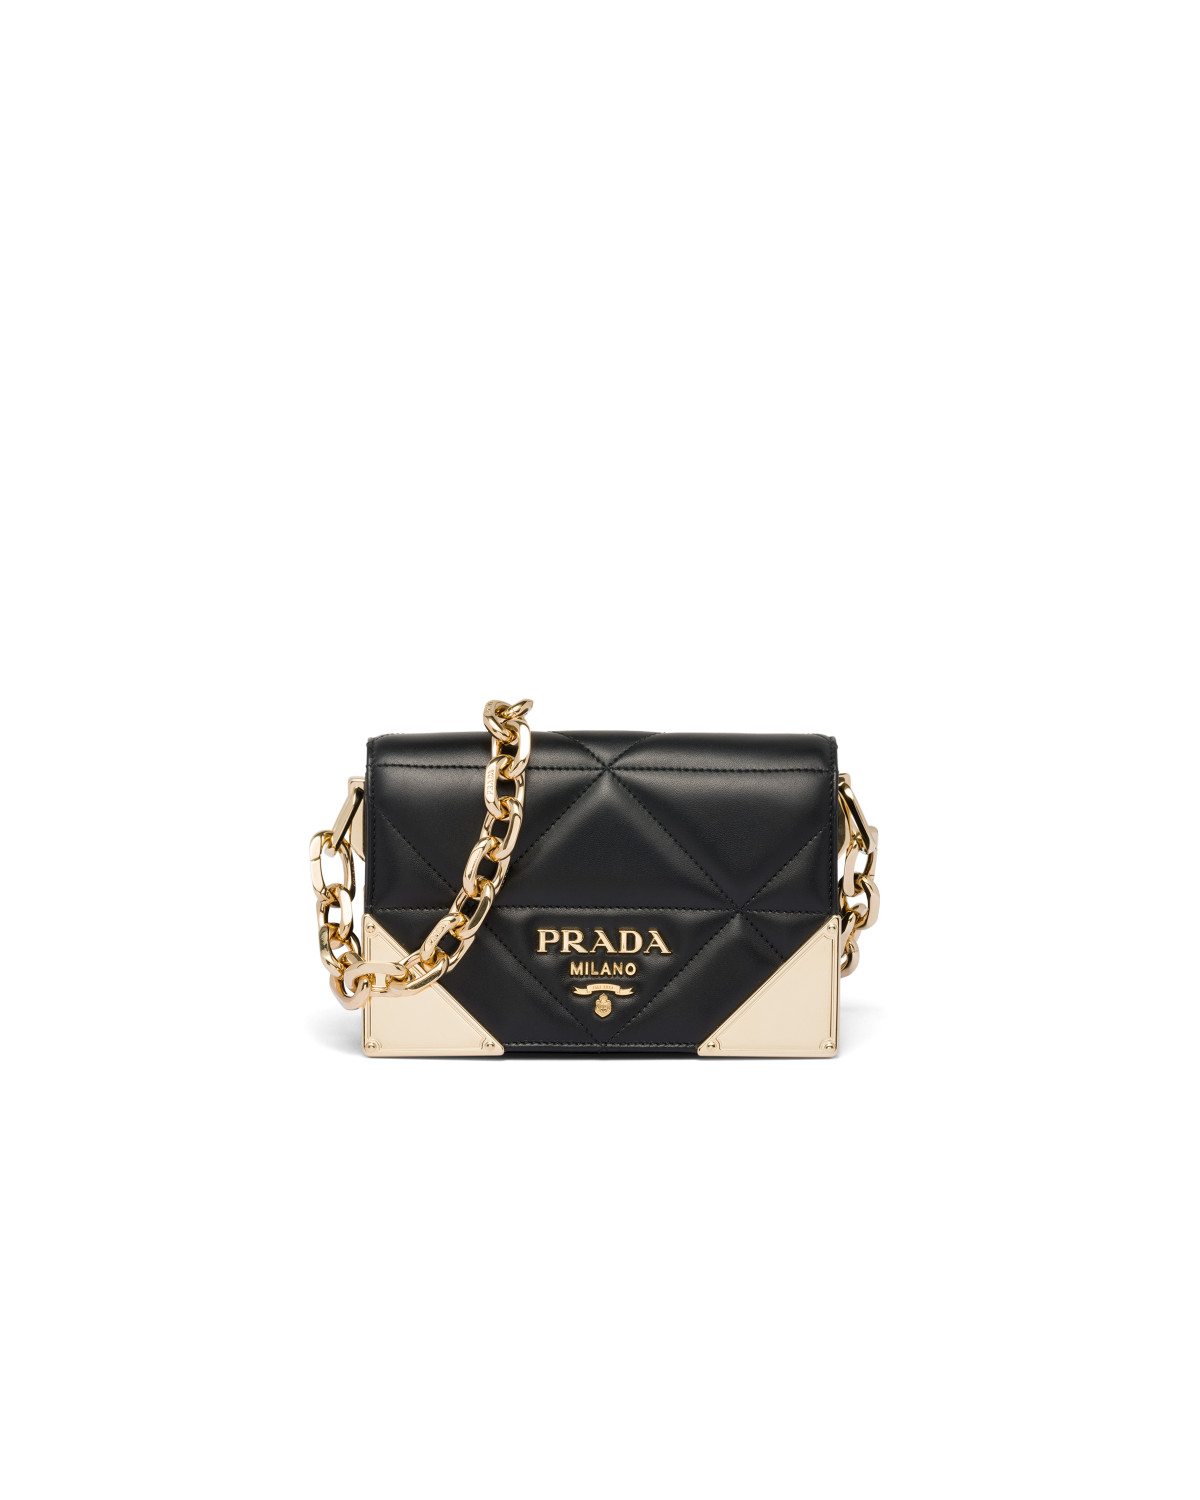 Prada Presents Its New Holiday 2022 Campaign: A Simple Gesture